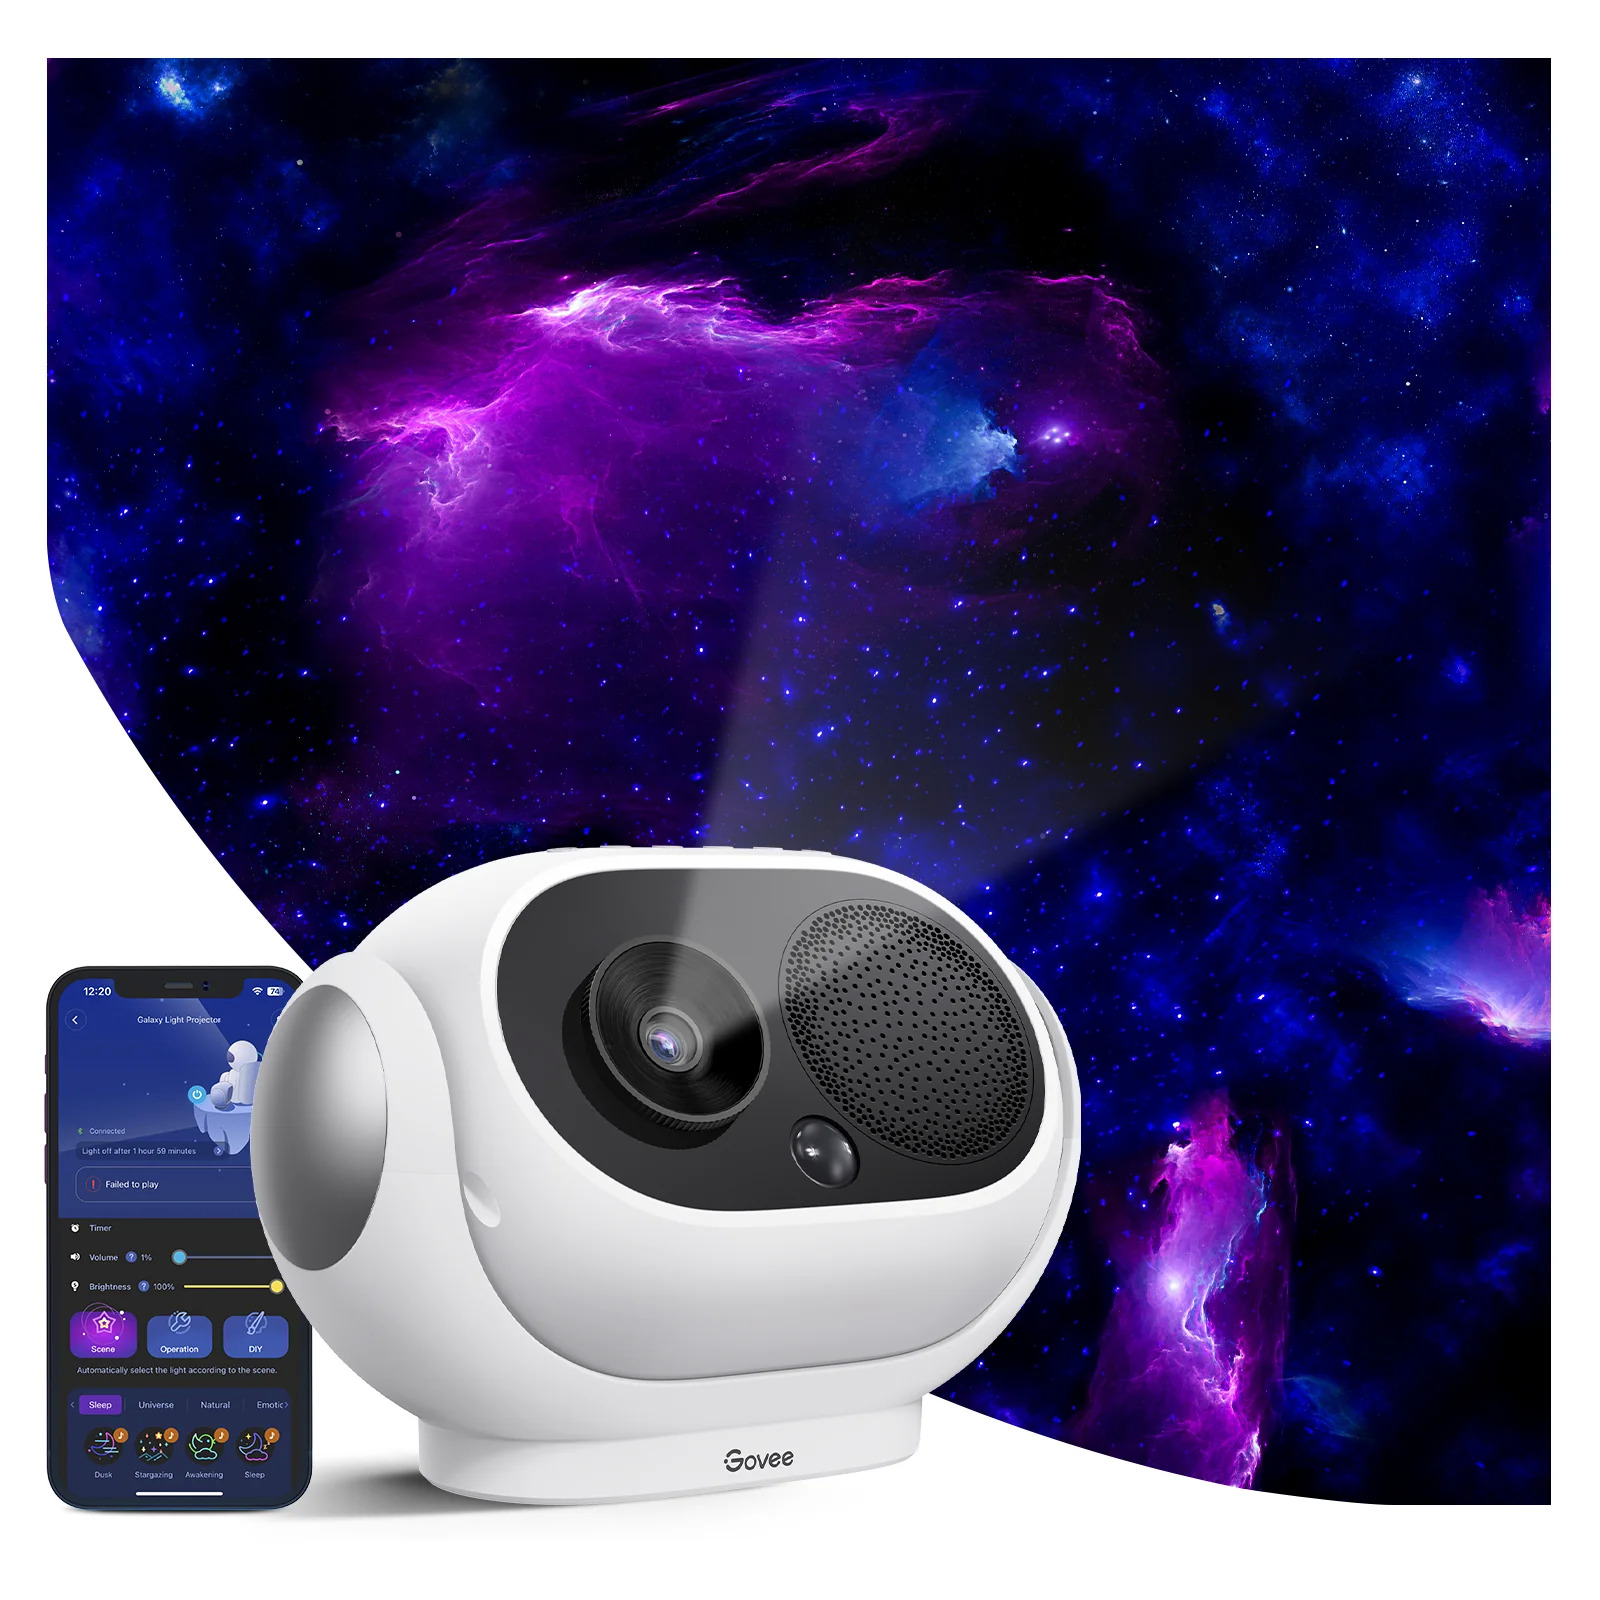 Govee Galaxy Light Projector Pro, WiFi/Bluetooth, H6092, Cosmic Projections, White Noise, Alexa/Google,  Free Shipping $113.4